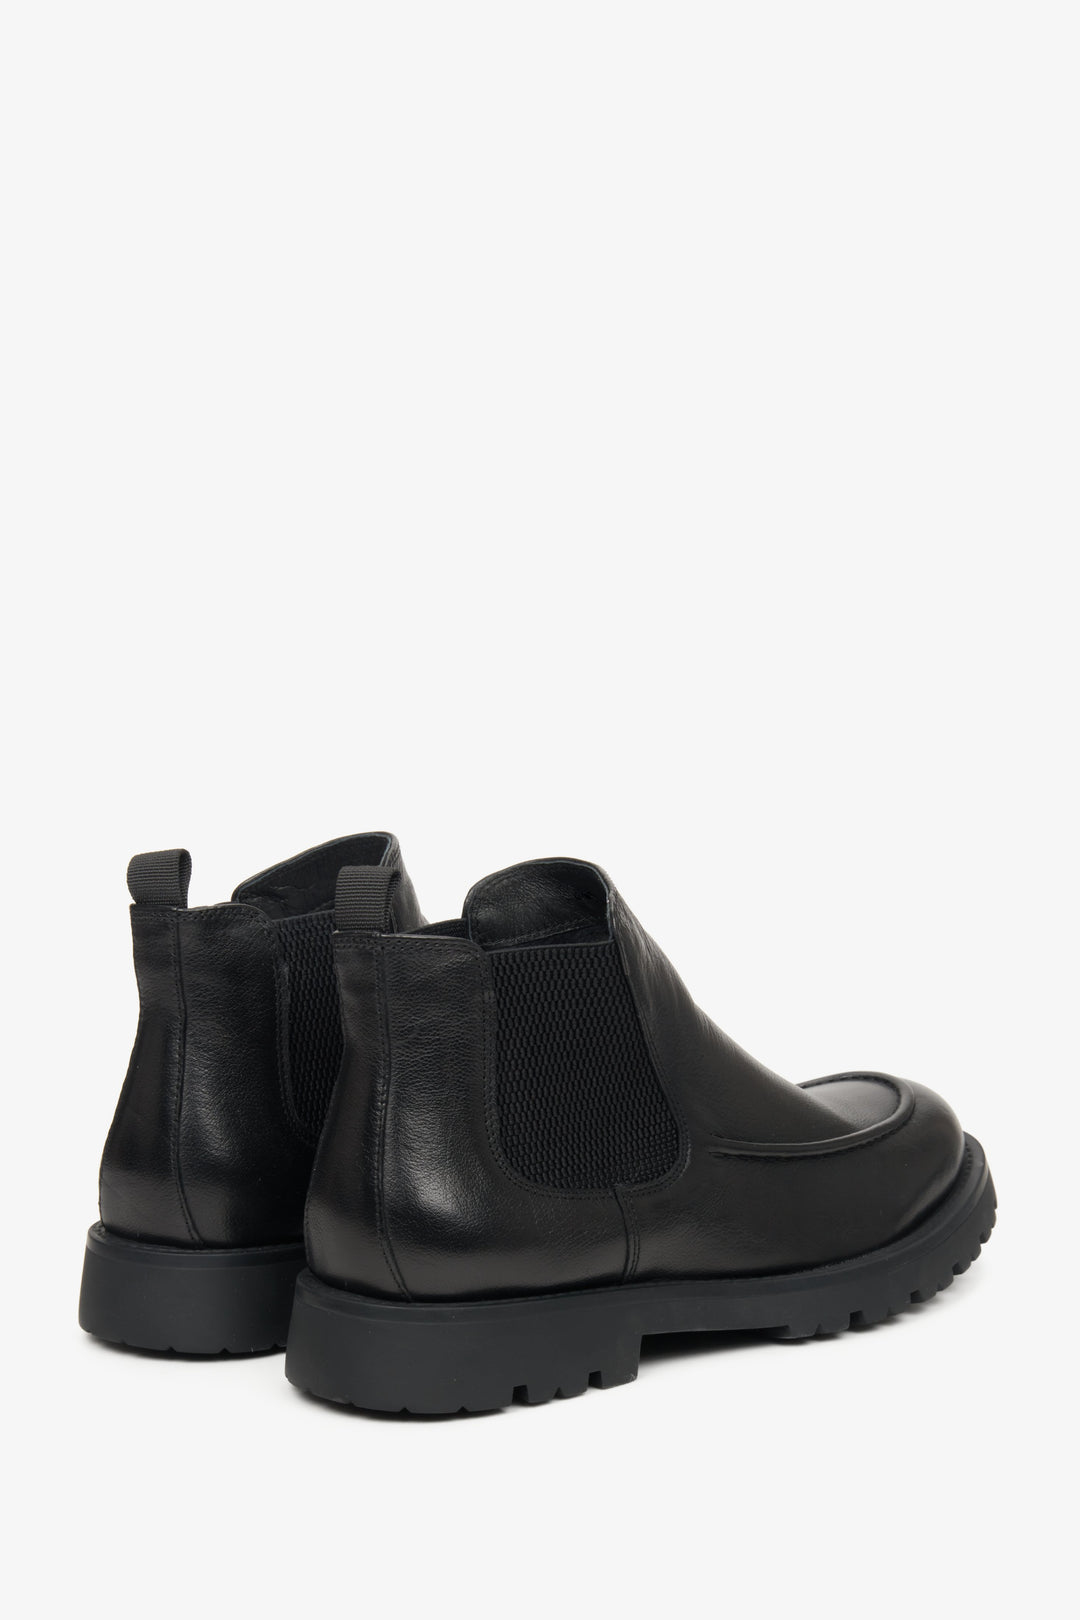 Low men's ankle boots by Estro - presentation of the side seam and heel of the boot.